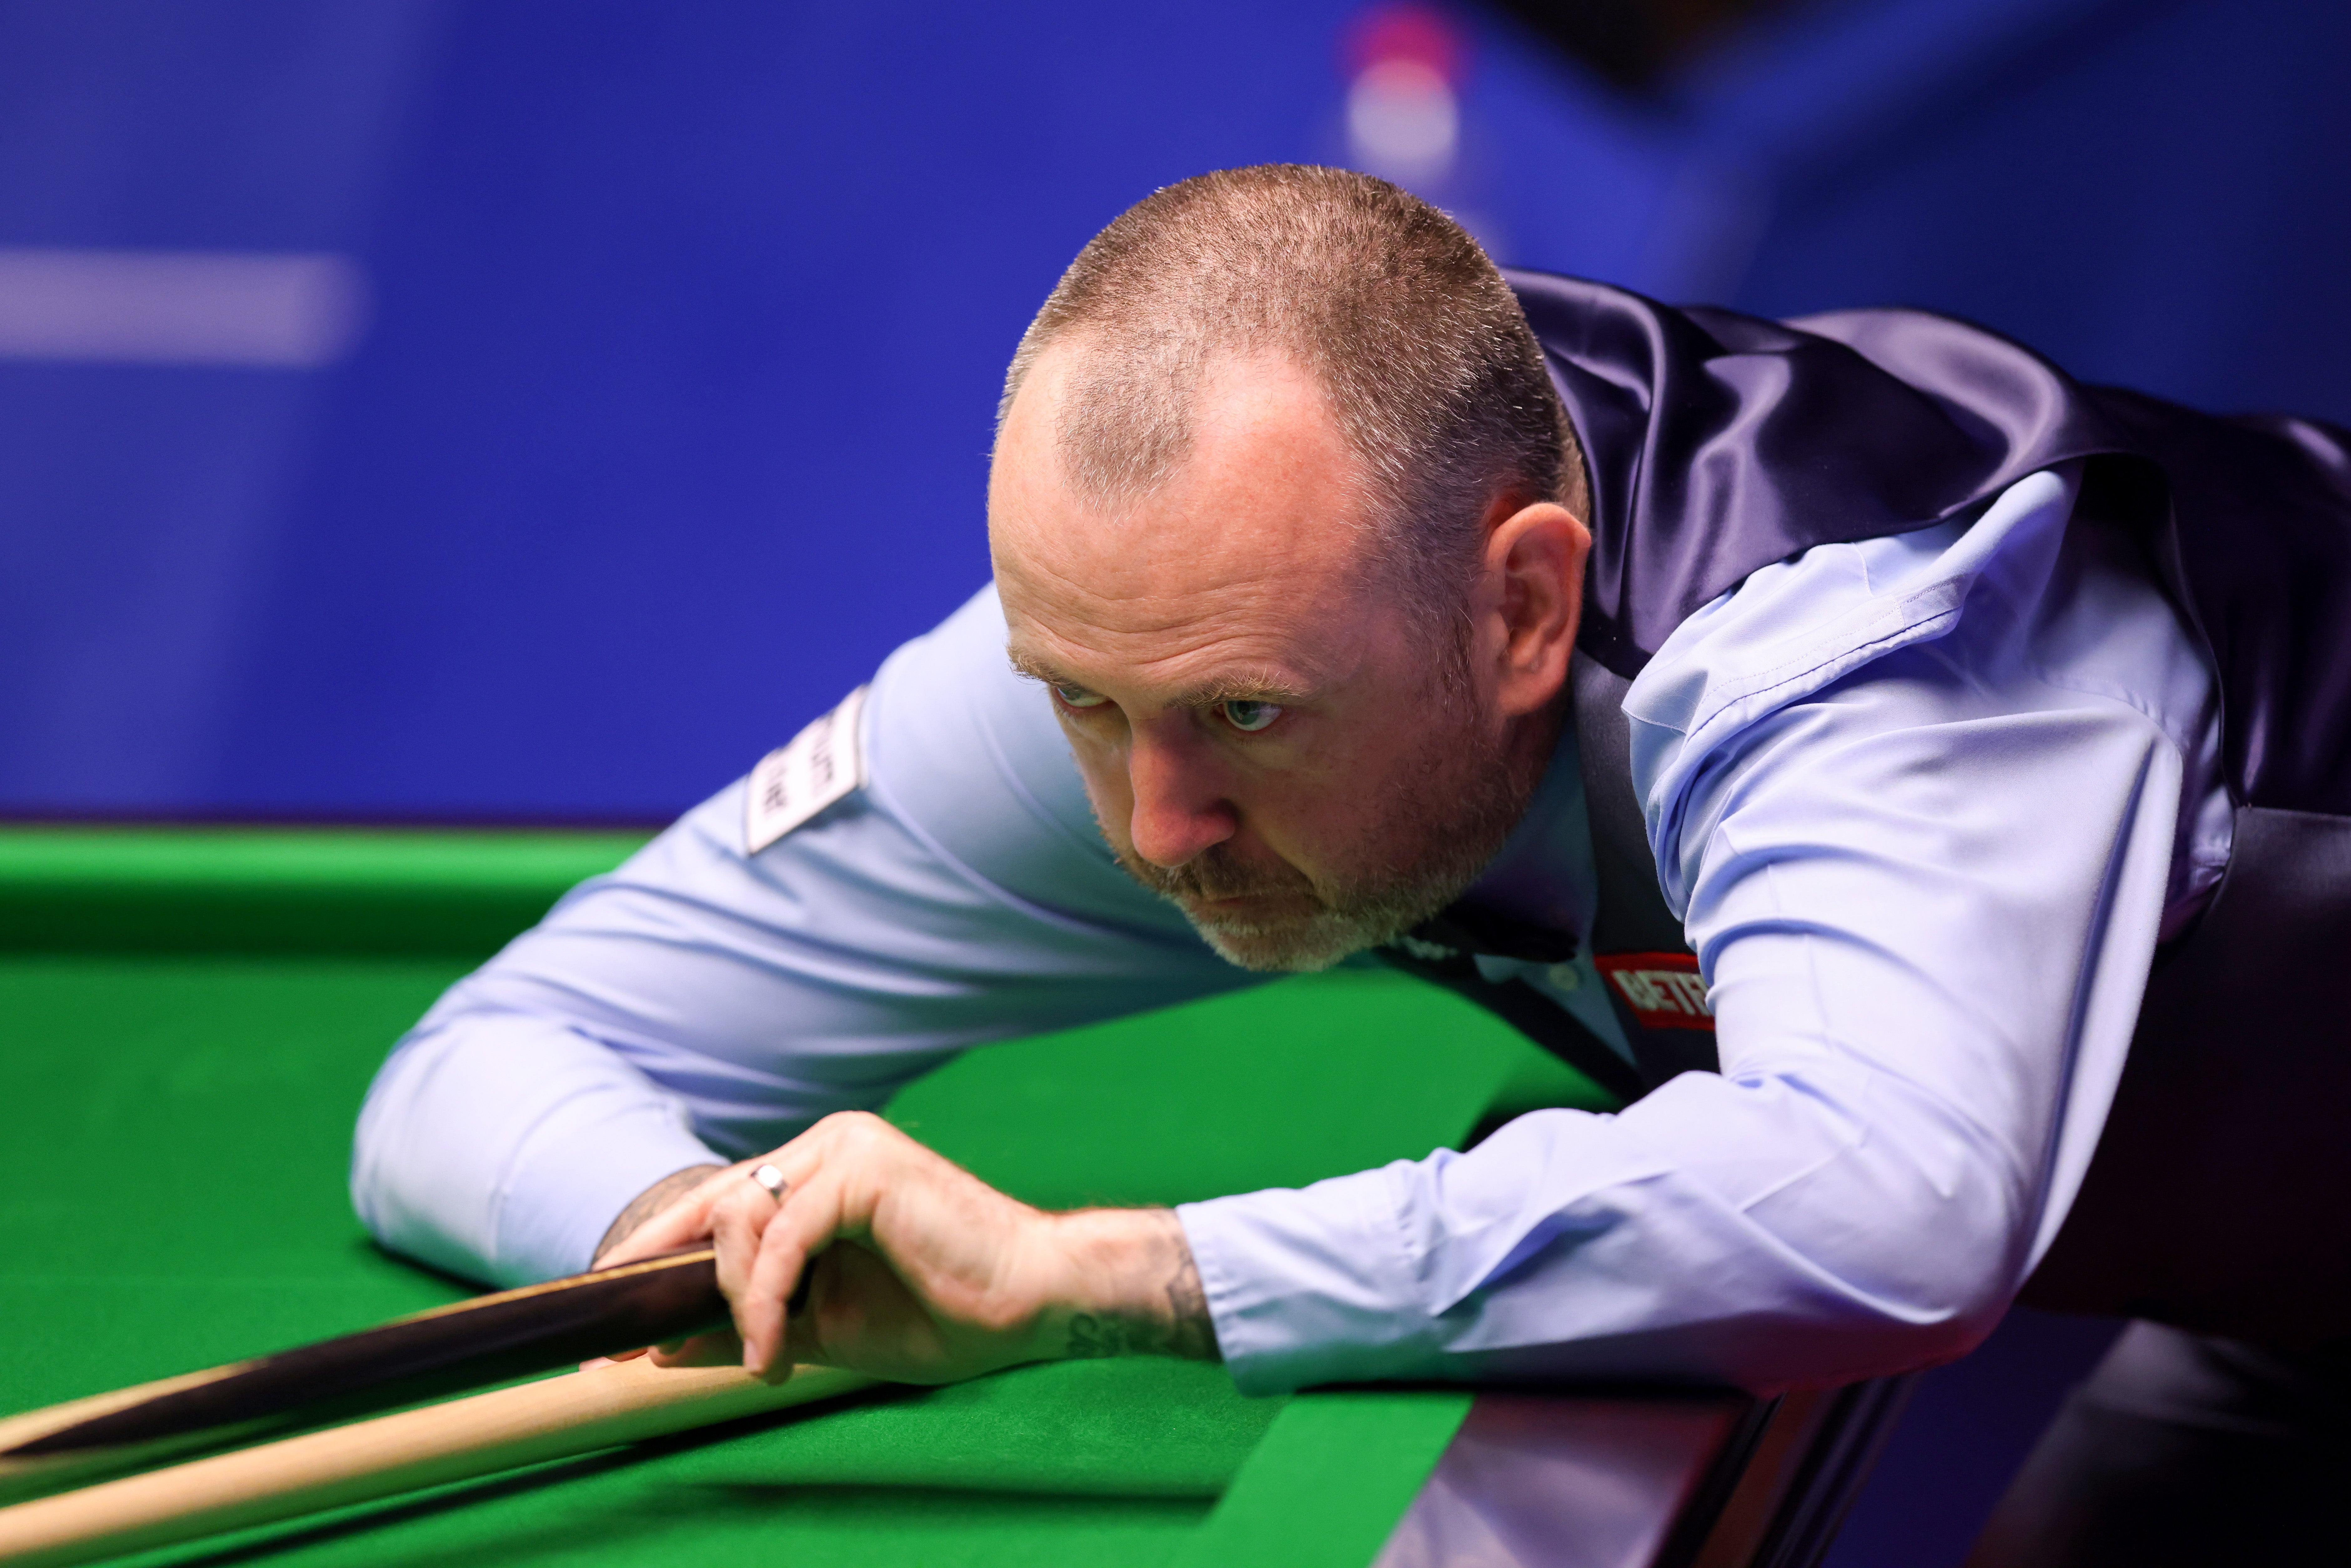 Mark Williams advanced to the second round on Wednesday